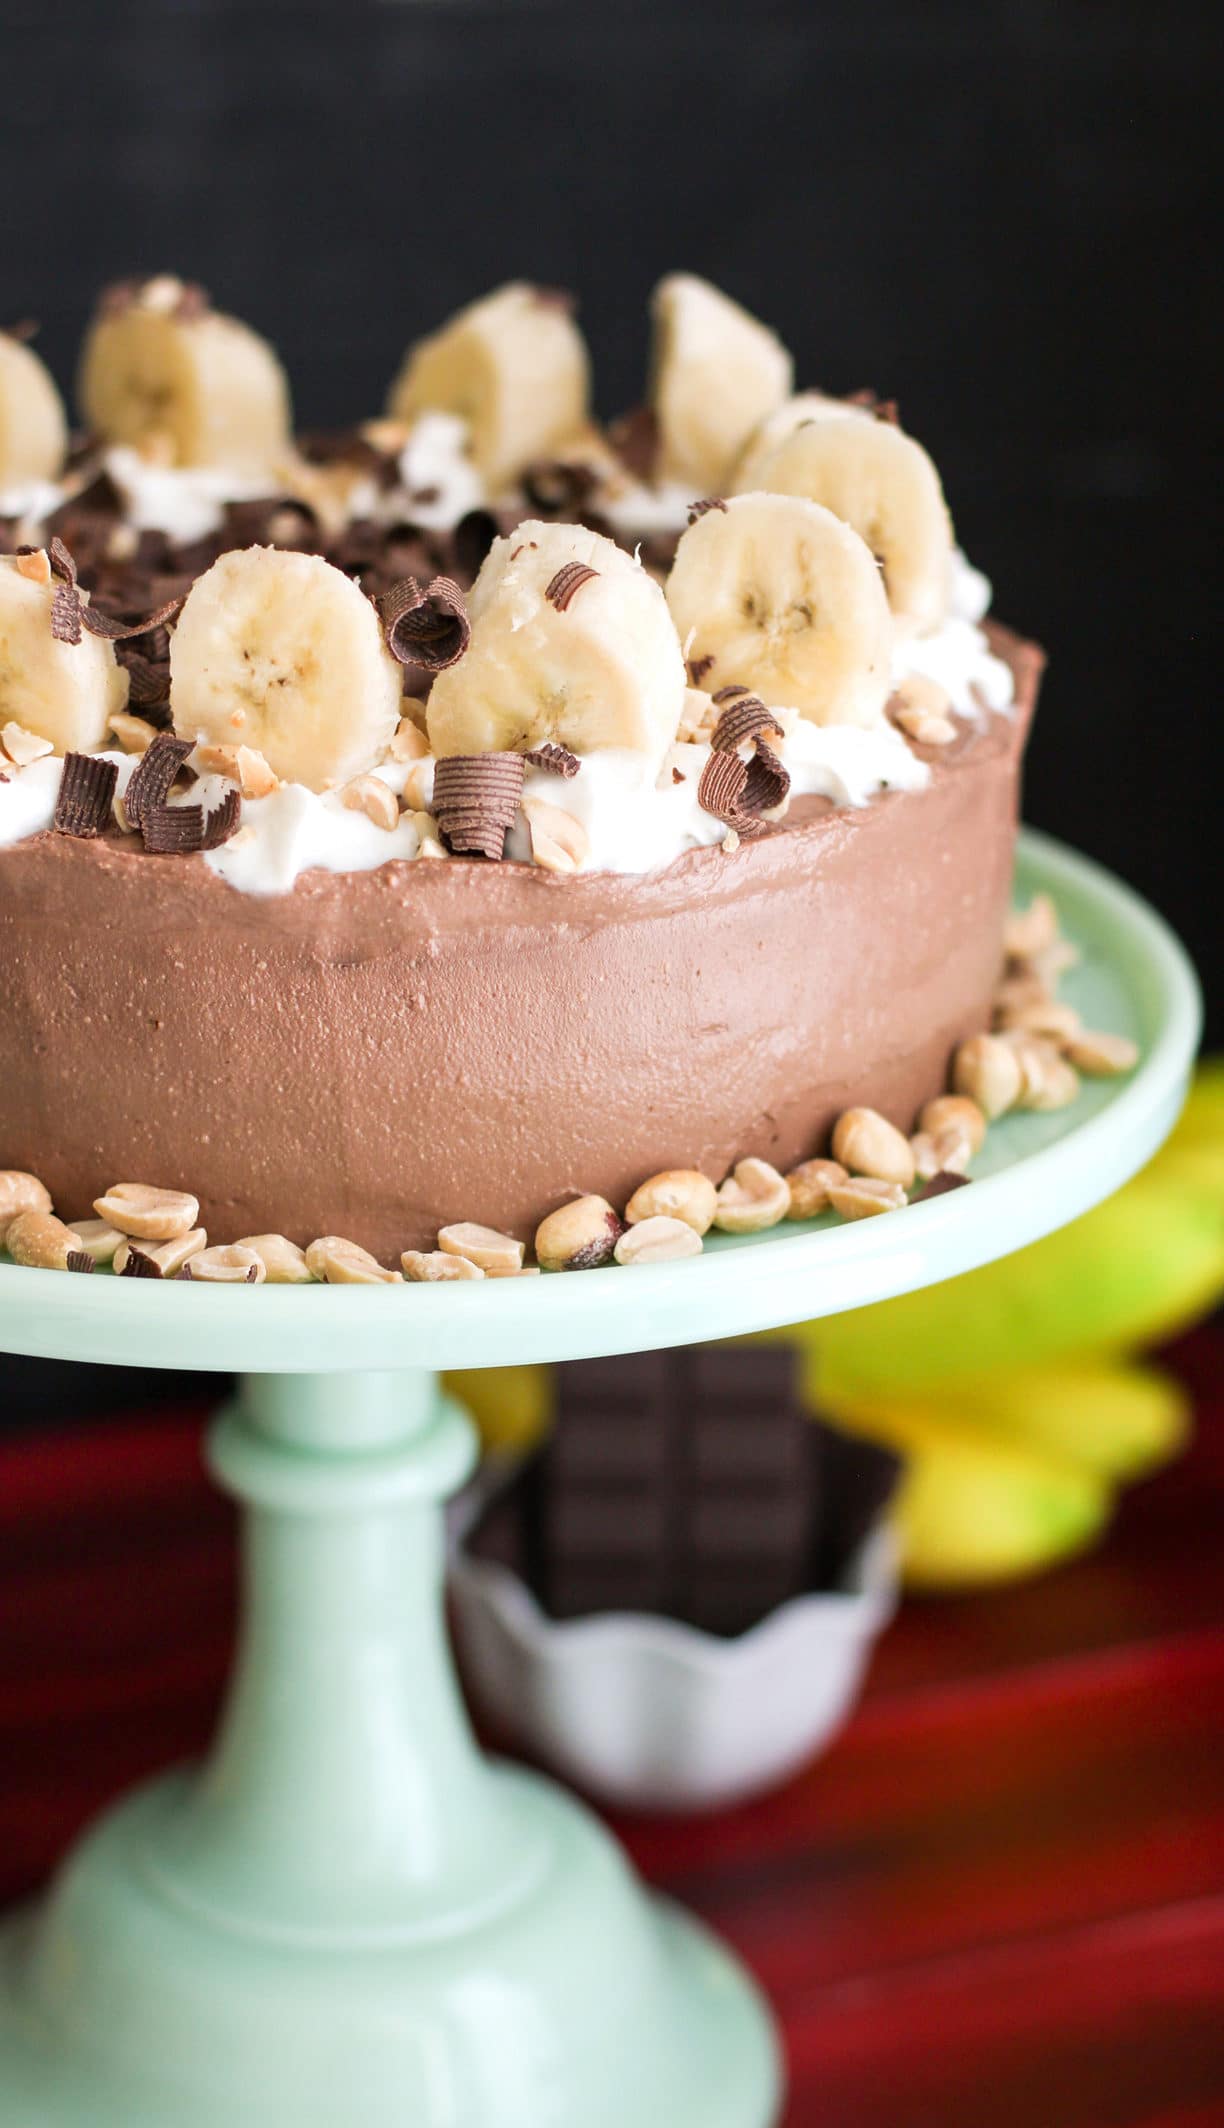 Healthy Chunky Monkey Cake: Peanut Butter Banana Cake with Chocolate Peanut Butter Frosting (refined sugar free, high protein, high fiber, gluten free) -- Healthy Dessert Recipes at Desserts with Benefits